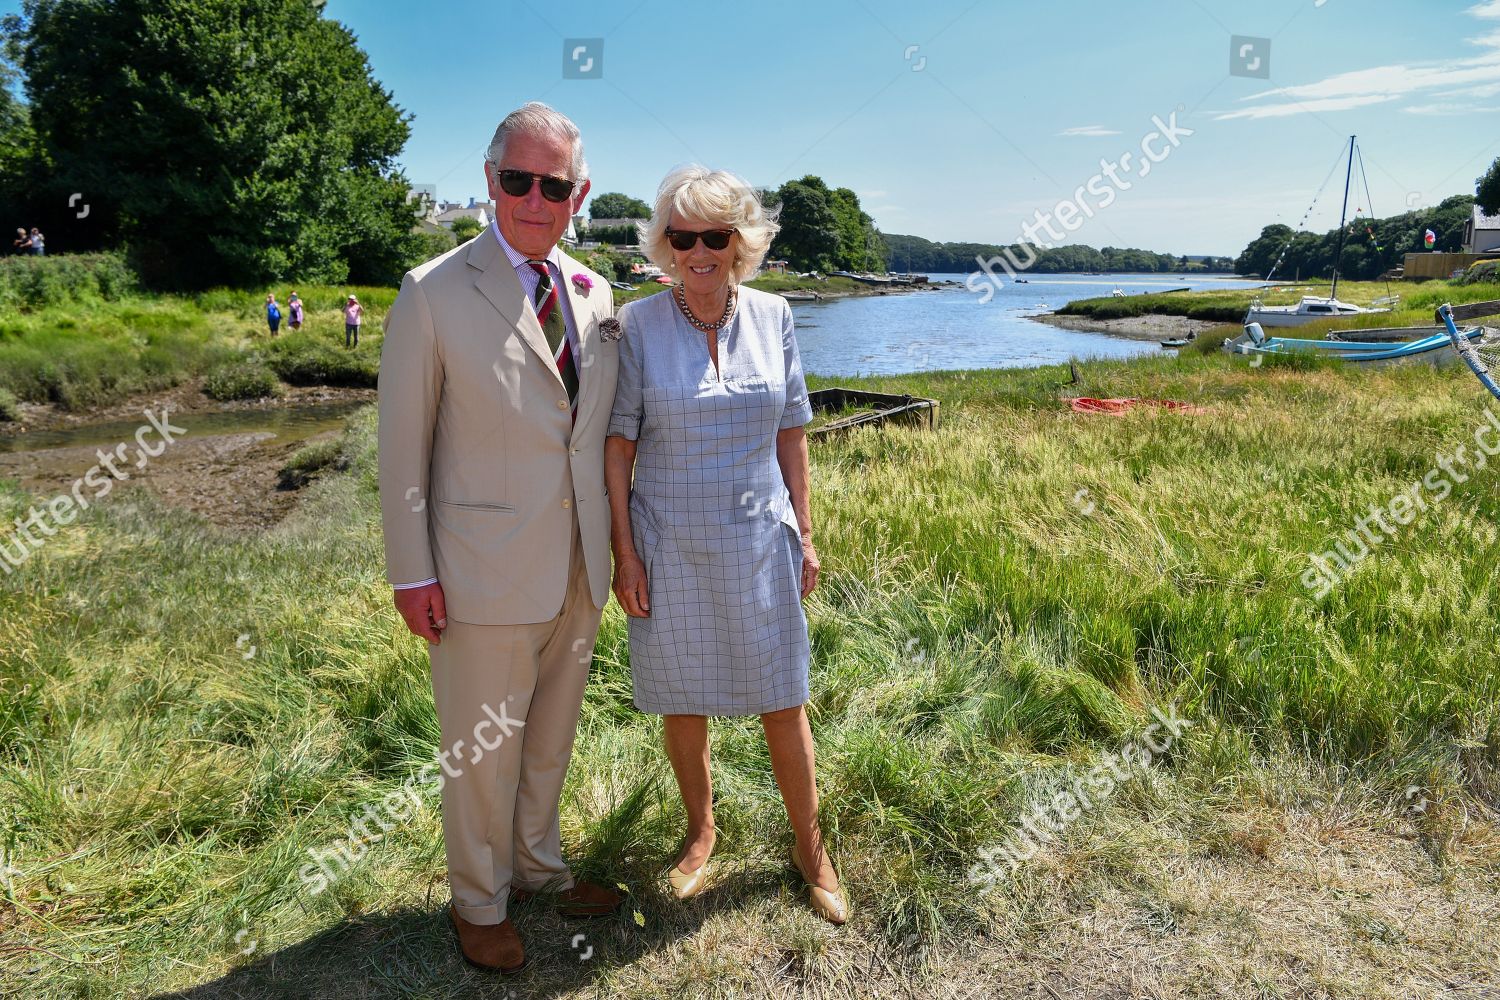 prince-charles-and-camilla-duchess-of-cornwall-visiting-to-wales-day-2-uk-shutterstock-editorial-9733343ar.jpg